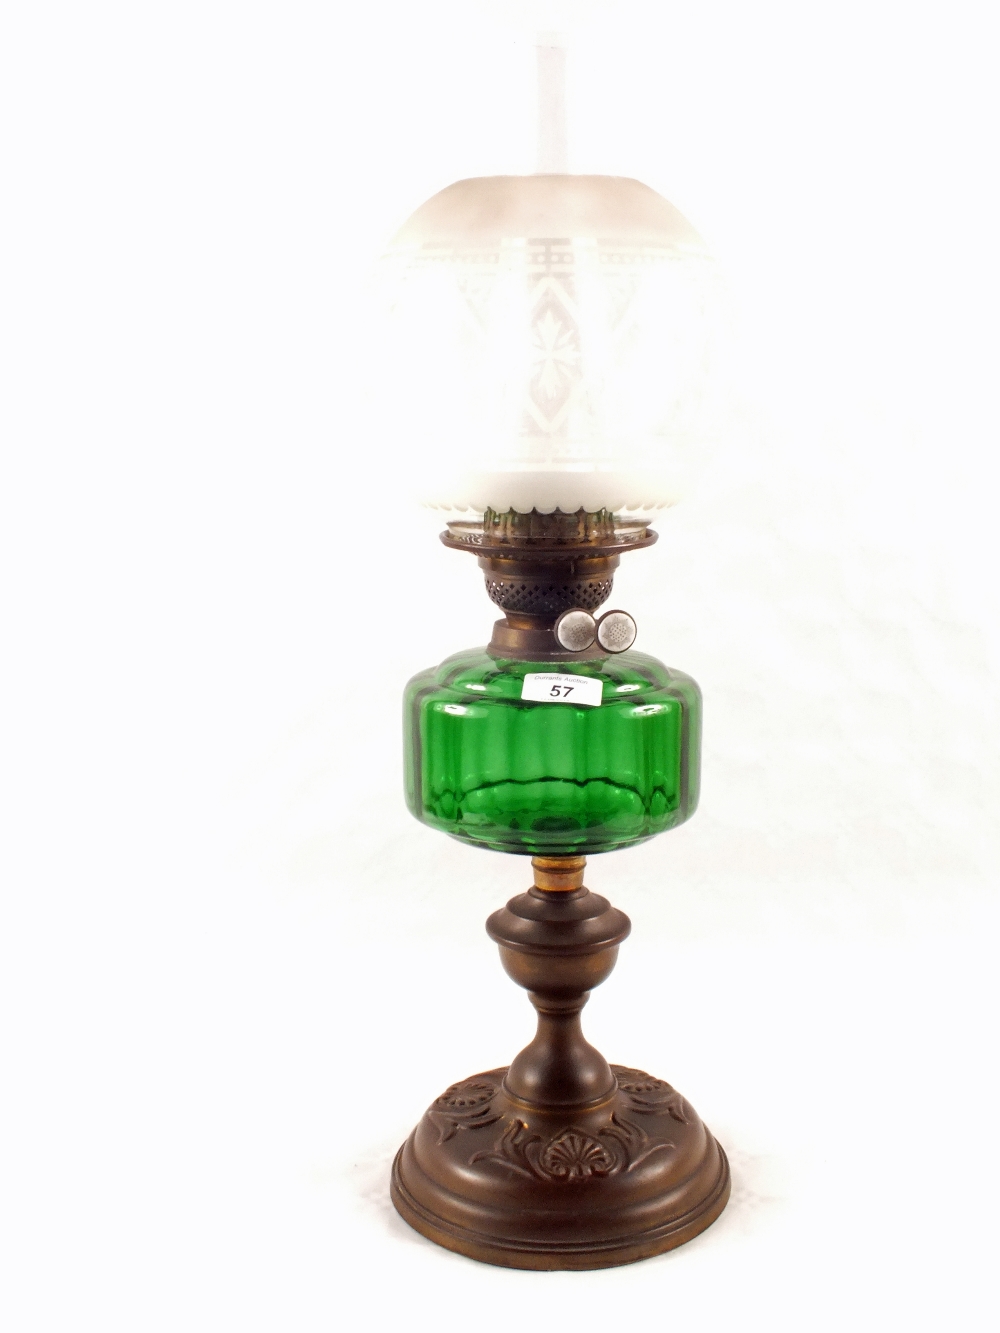 An embossed Brass oil lamp with green glass bowl and etched globe